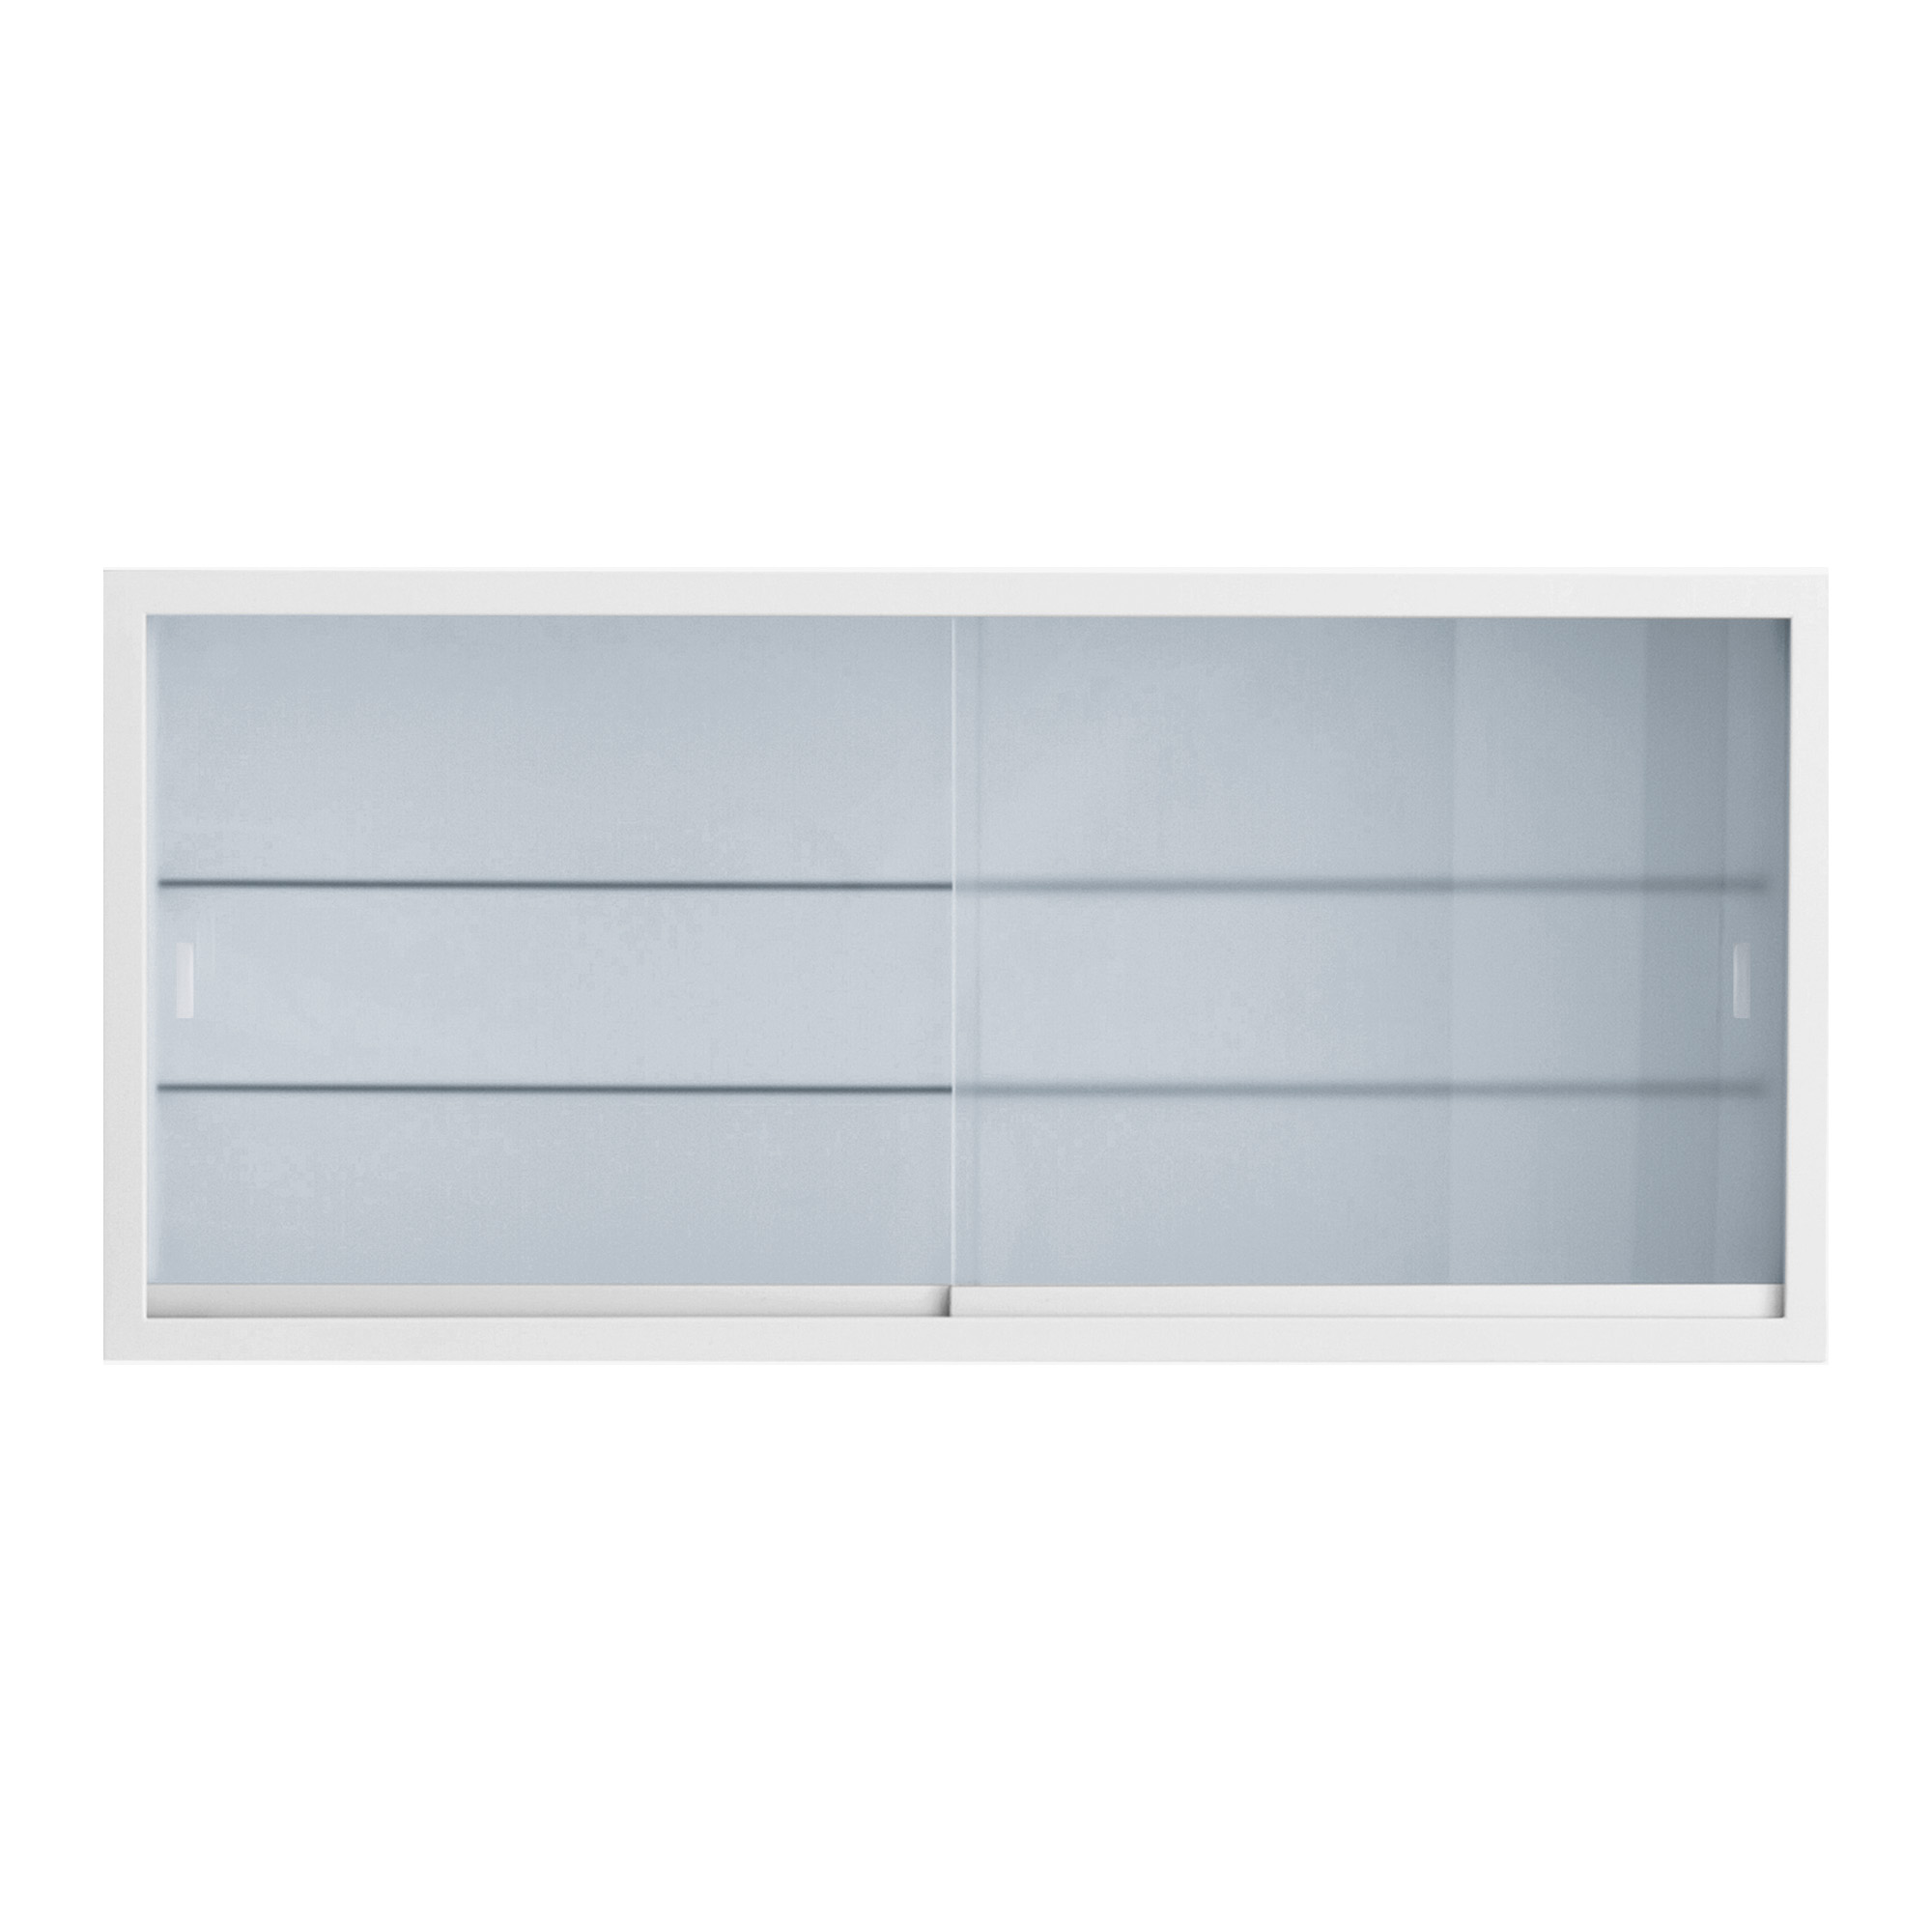 Hanging display case with 2 shelves and sliding opening with glass doors